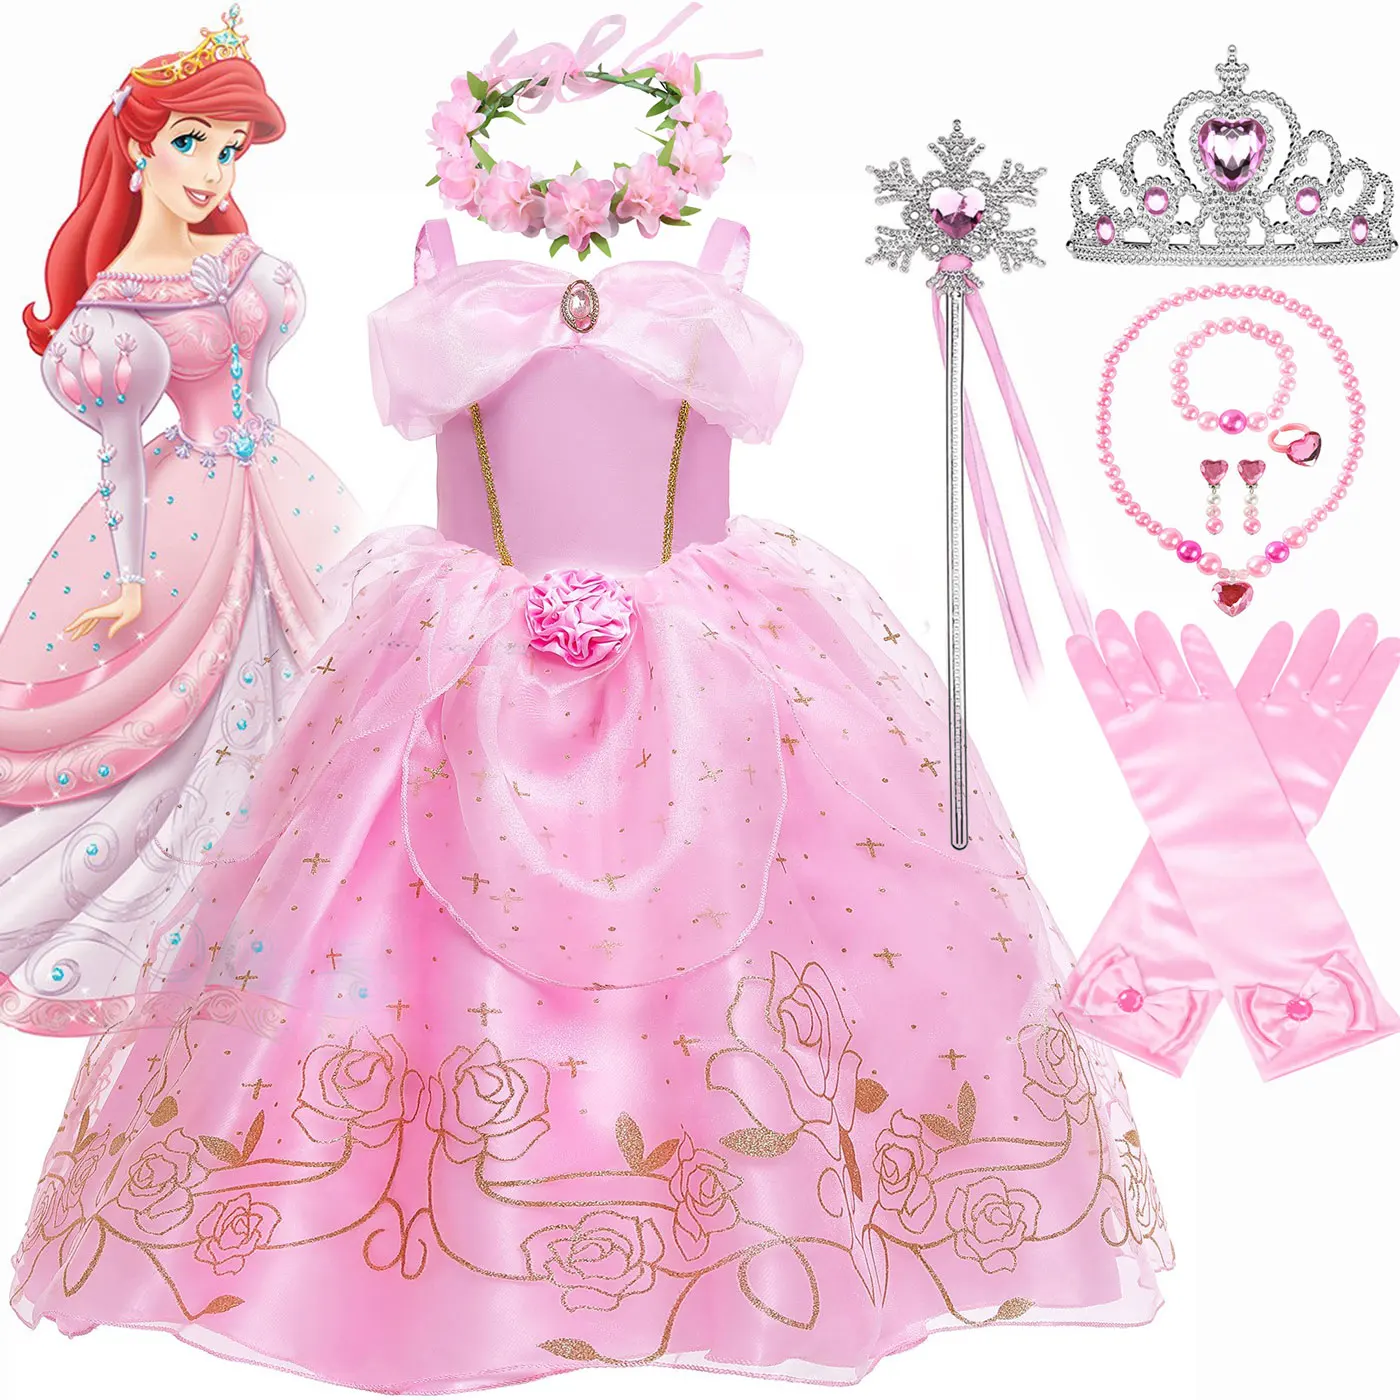 

Disney New Pink Princess Dress for Girl Sleeping Beauty Cosplay Costume Summer Rose Print Sling Frocks Holiday Party Favors